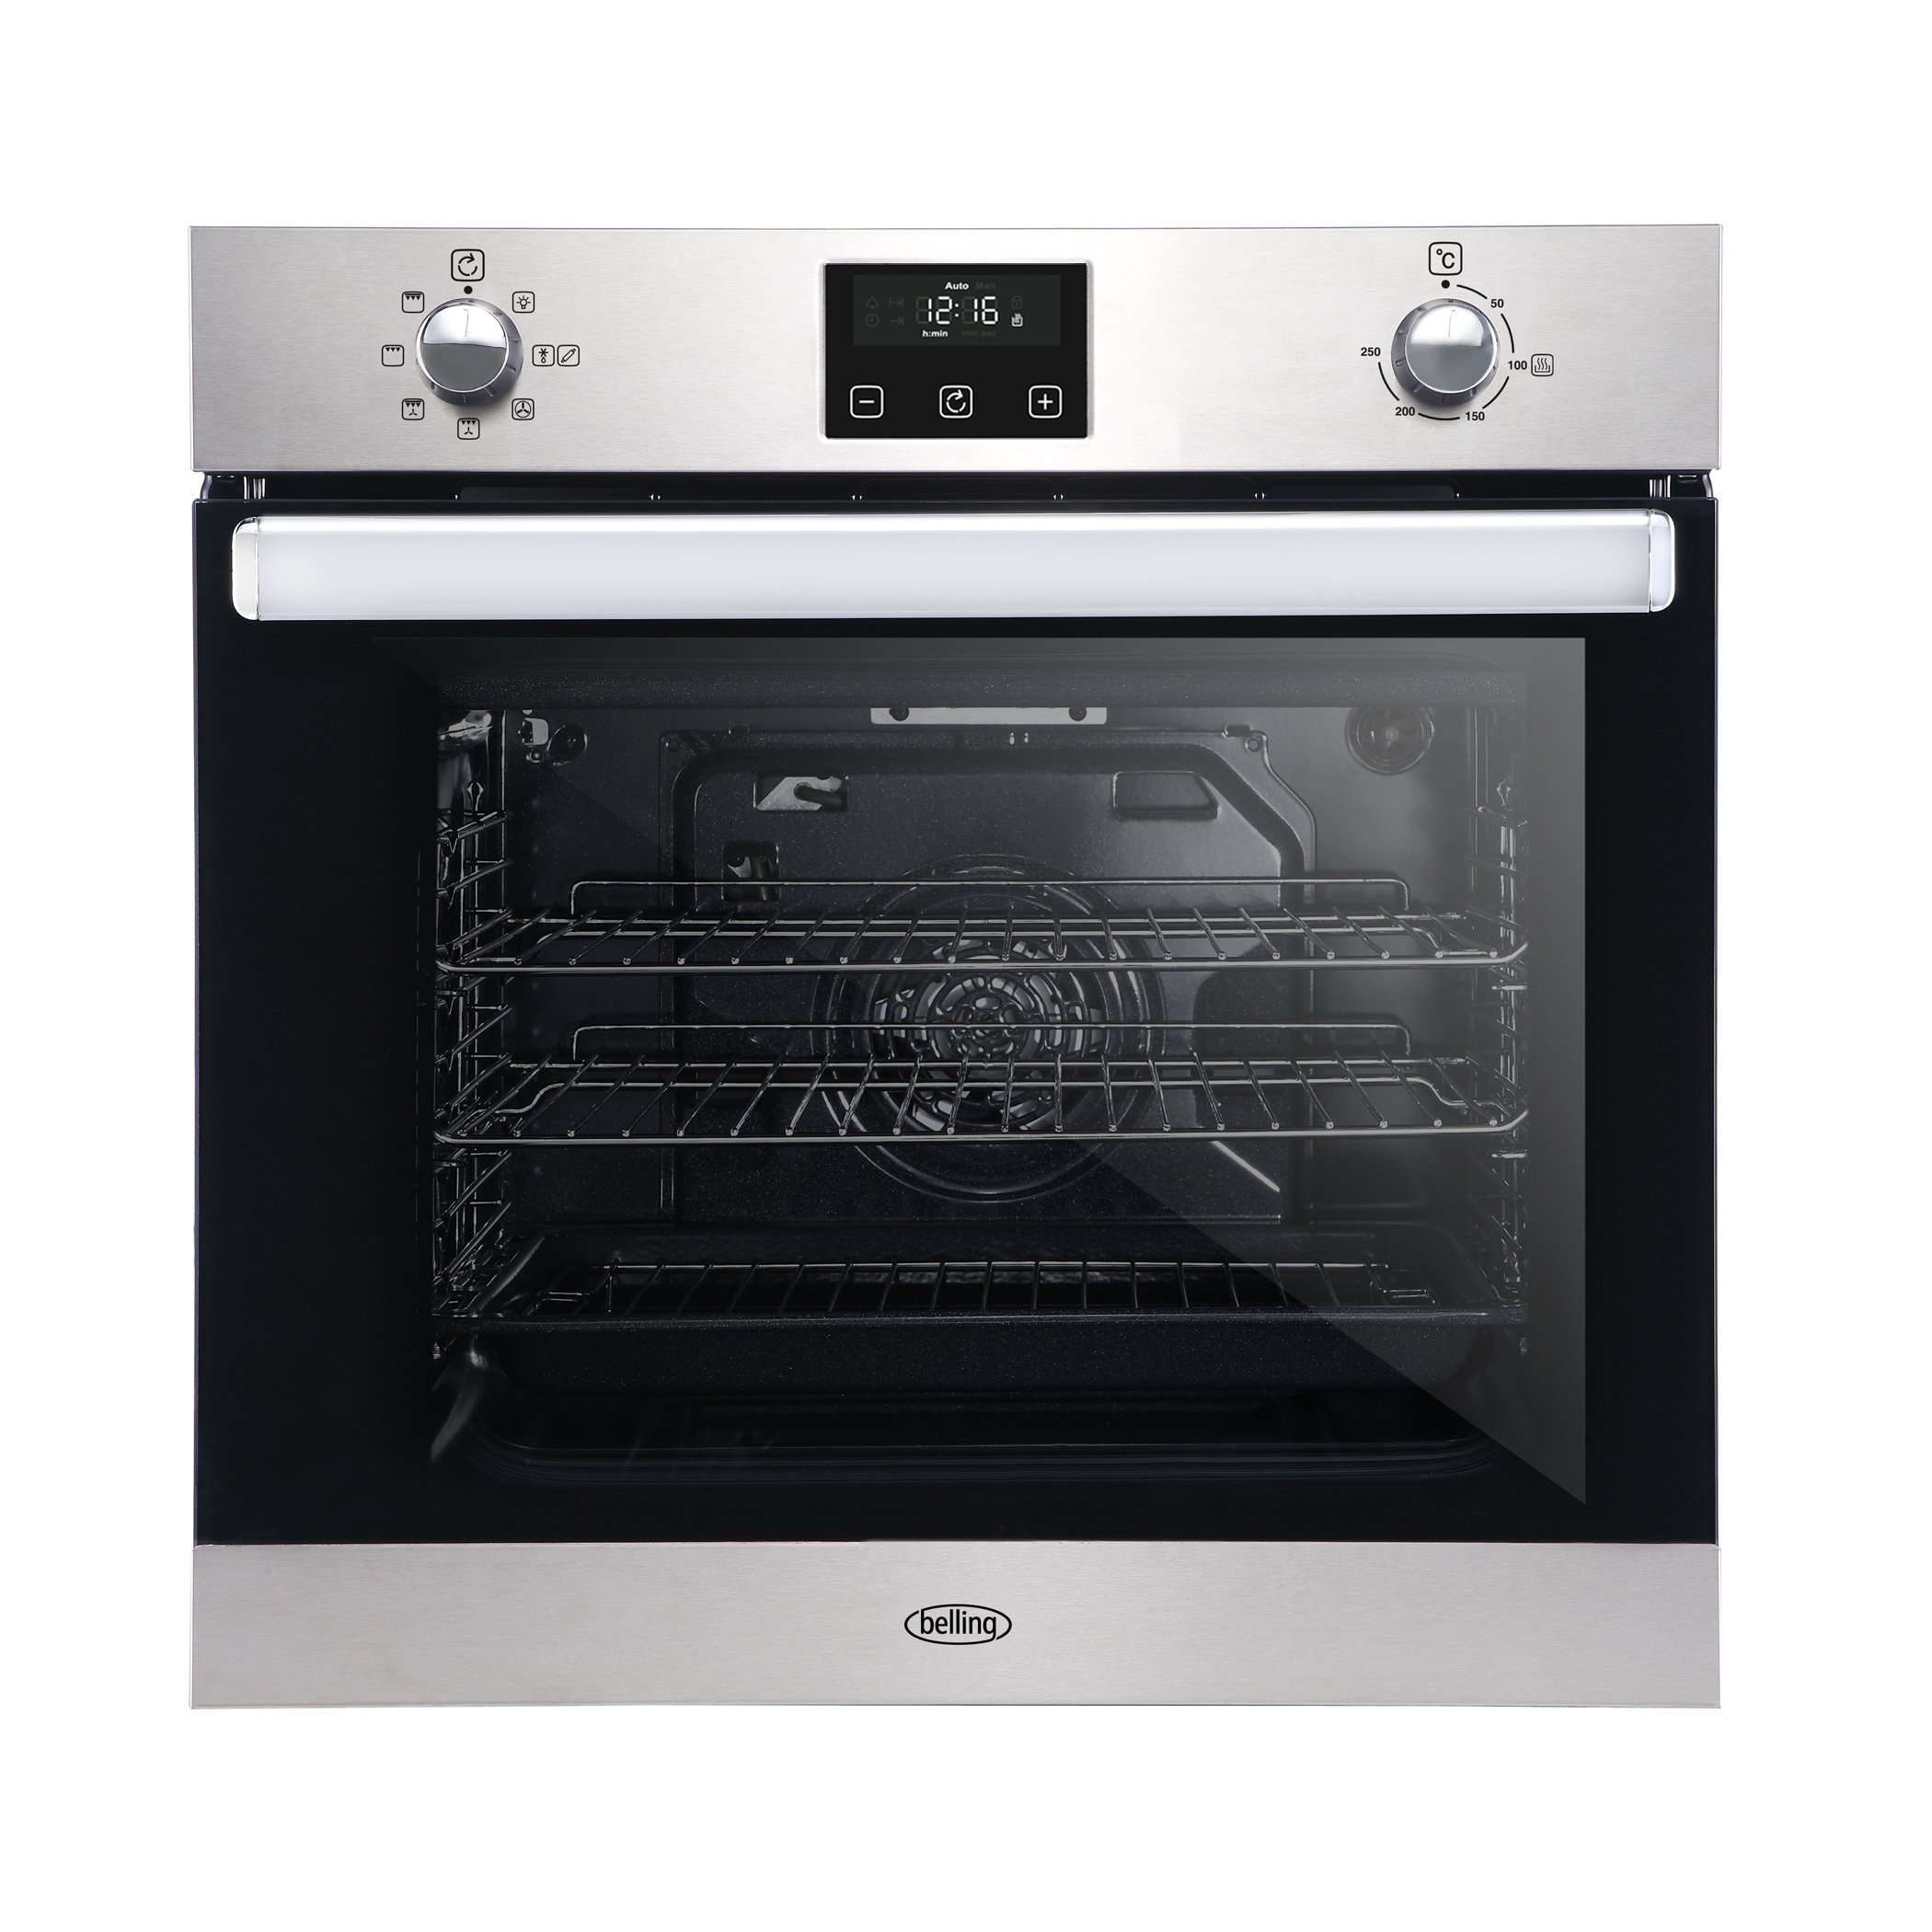 60cm built-in fanned oven with 73L gross capacity and easy clean enamel. Additional features include LED programmable timer, variable grill and defrost. A energy rating.